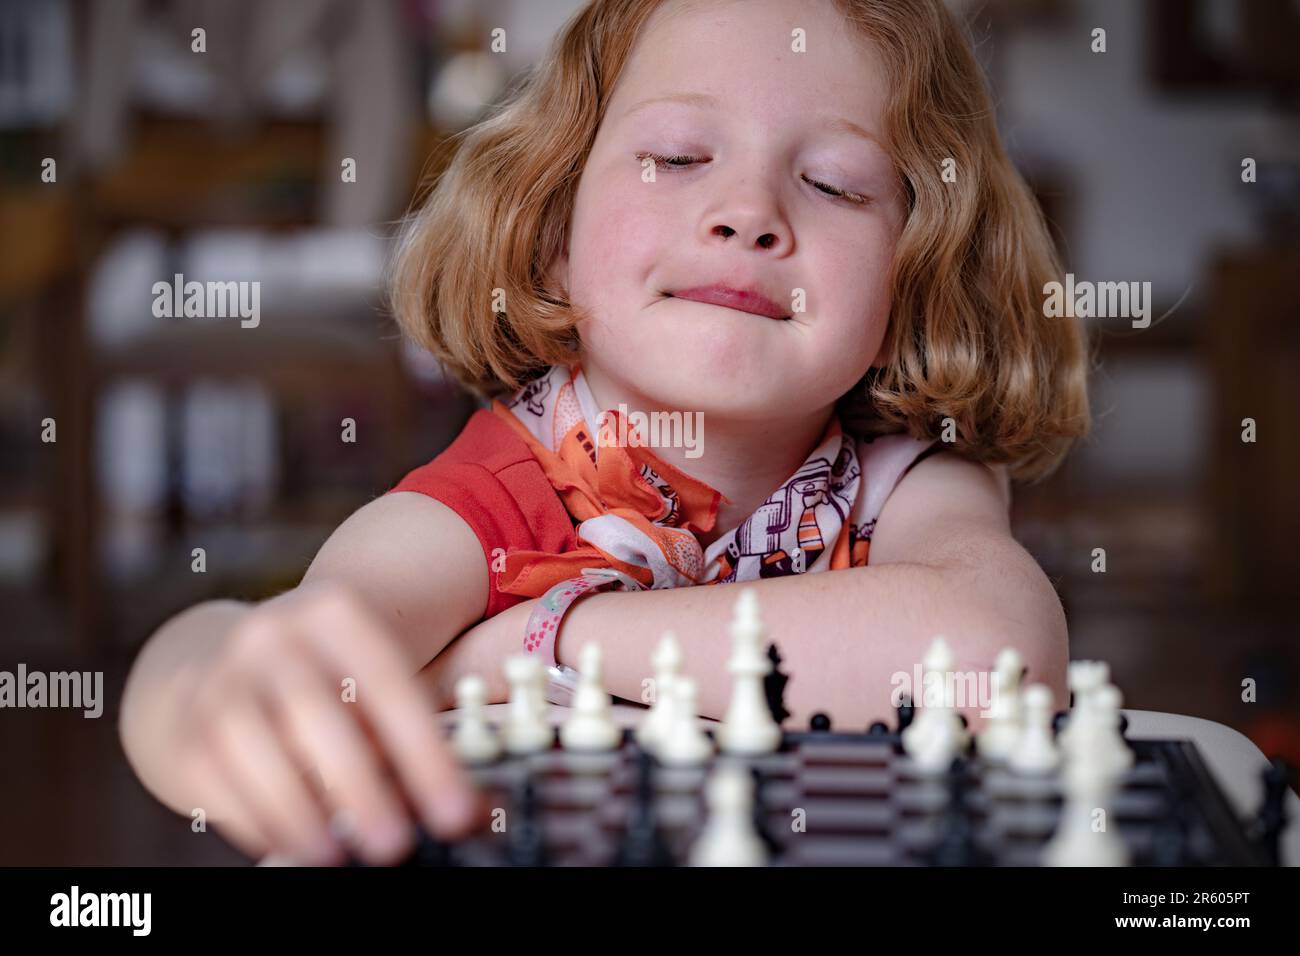 A red- haired girl playing chess, thinking pondering the next move. Differential focus, close up. Stock Photo